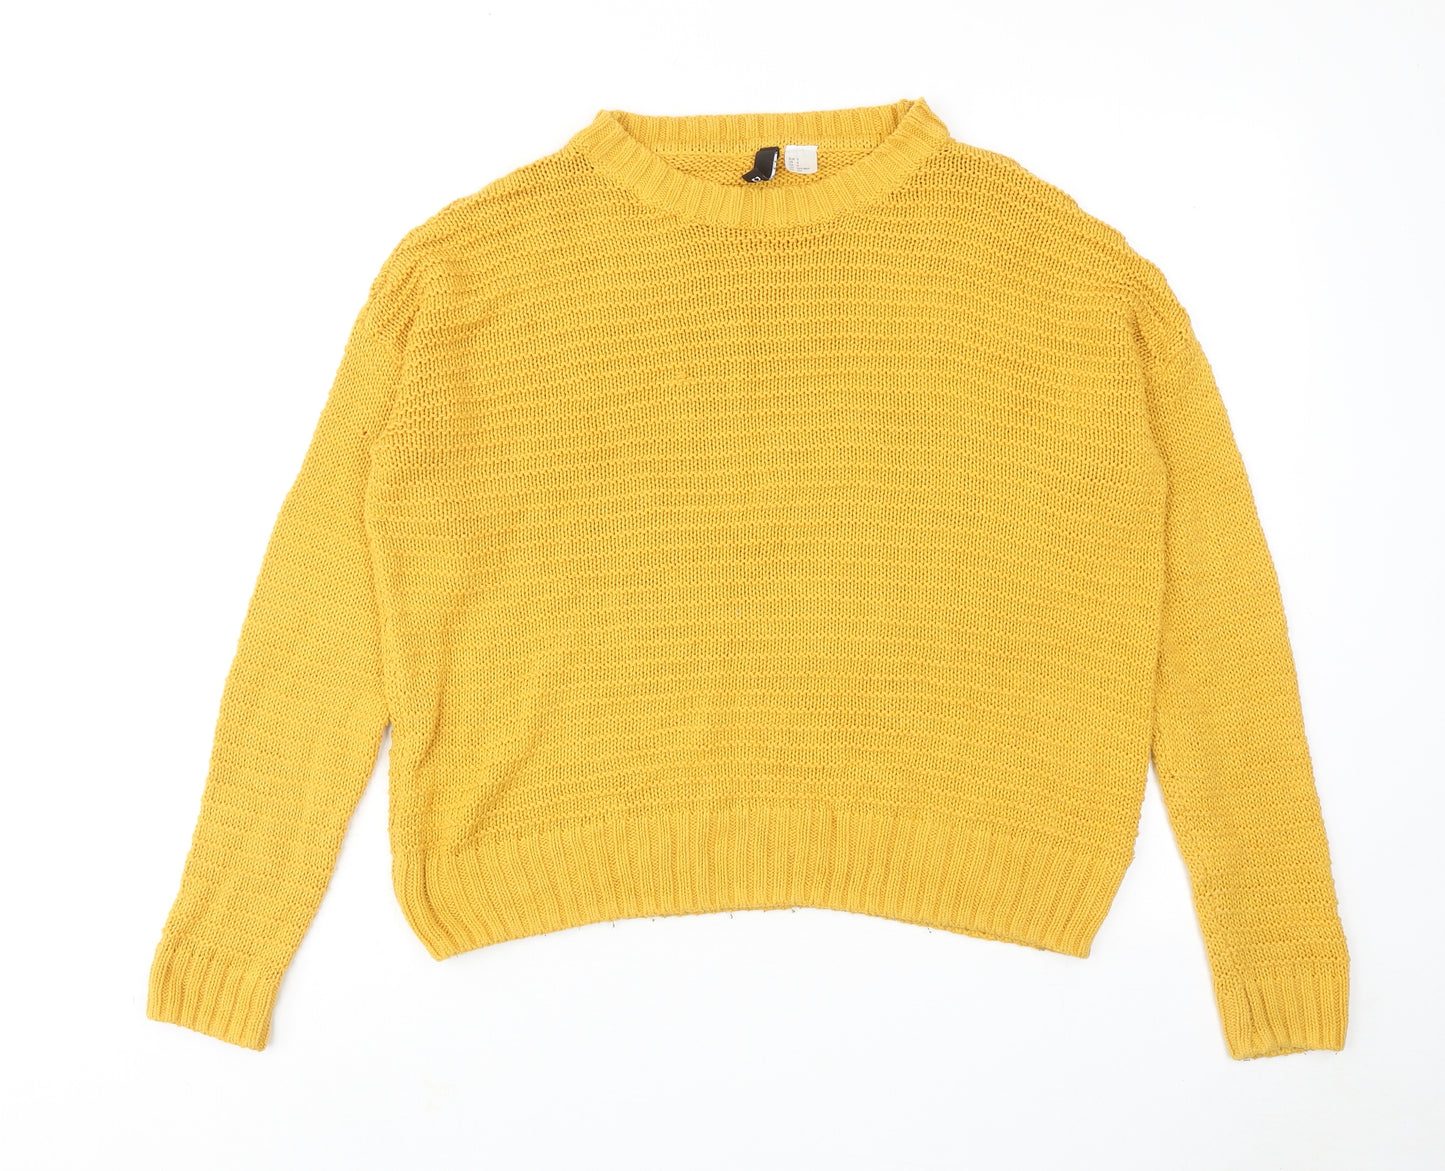 H&M Womens Yellow Round Neck Acrylic Pullover Jumper Size S